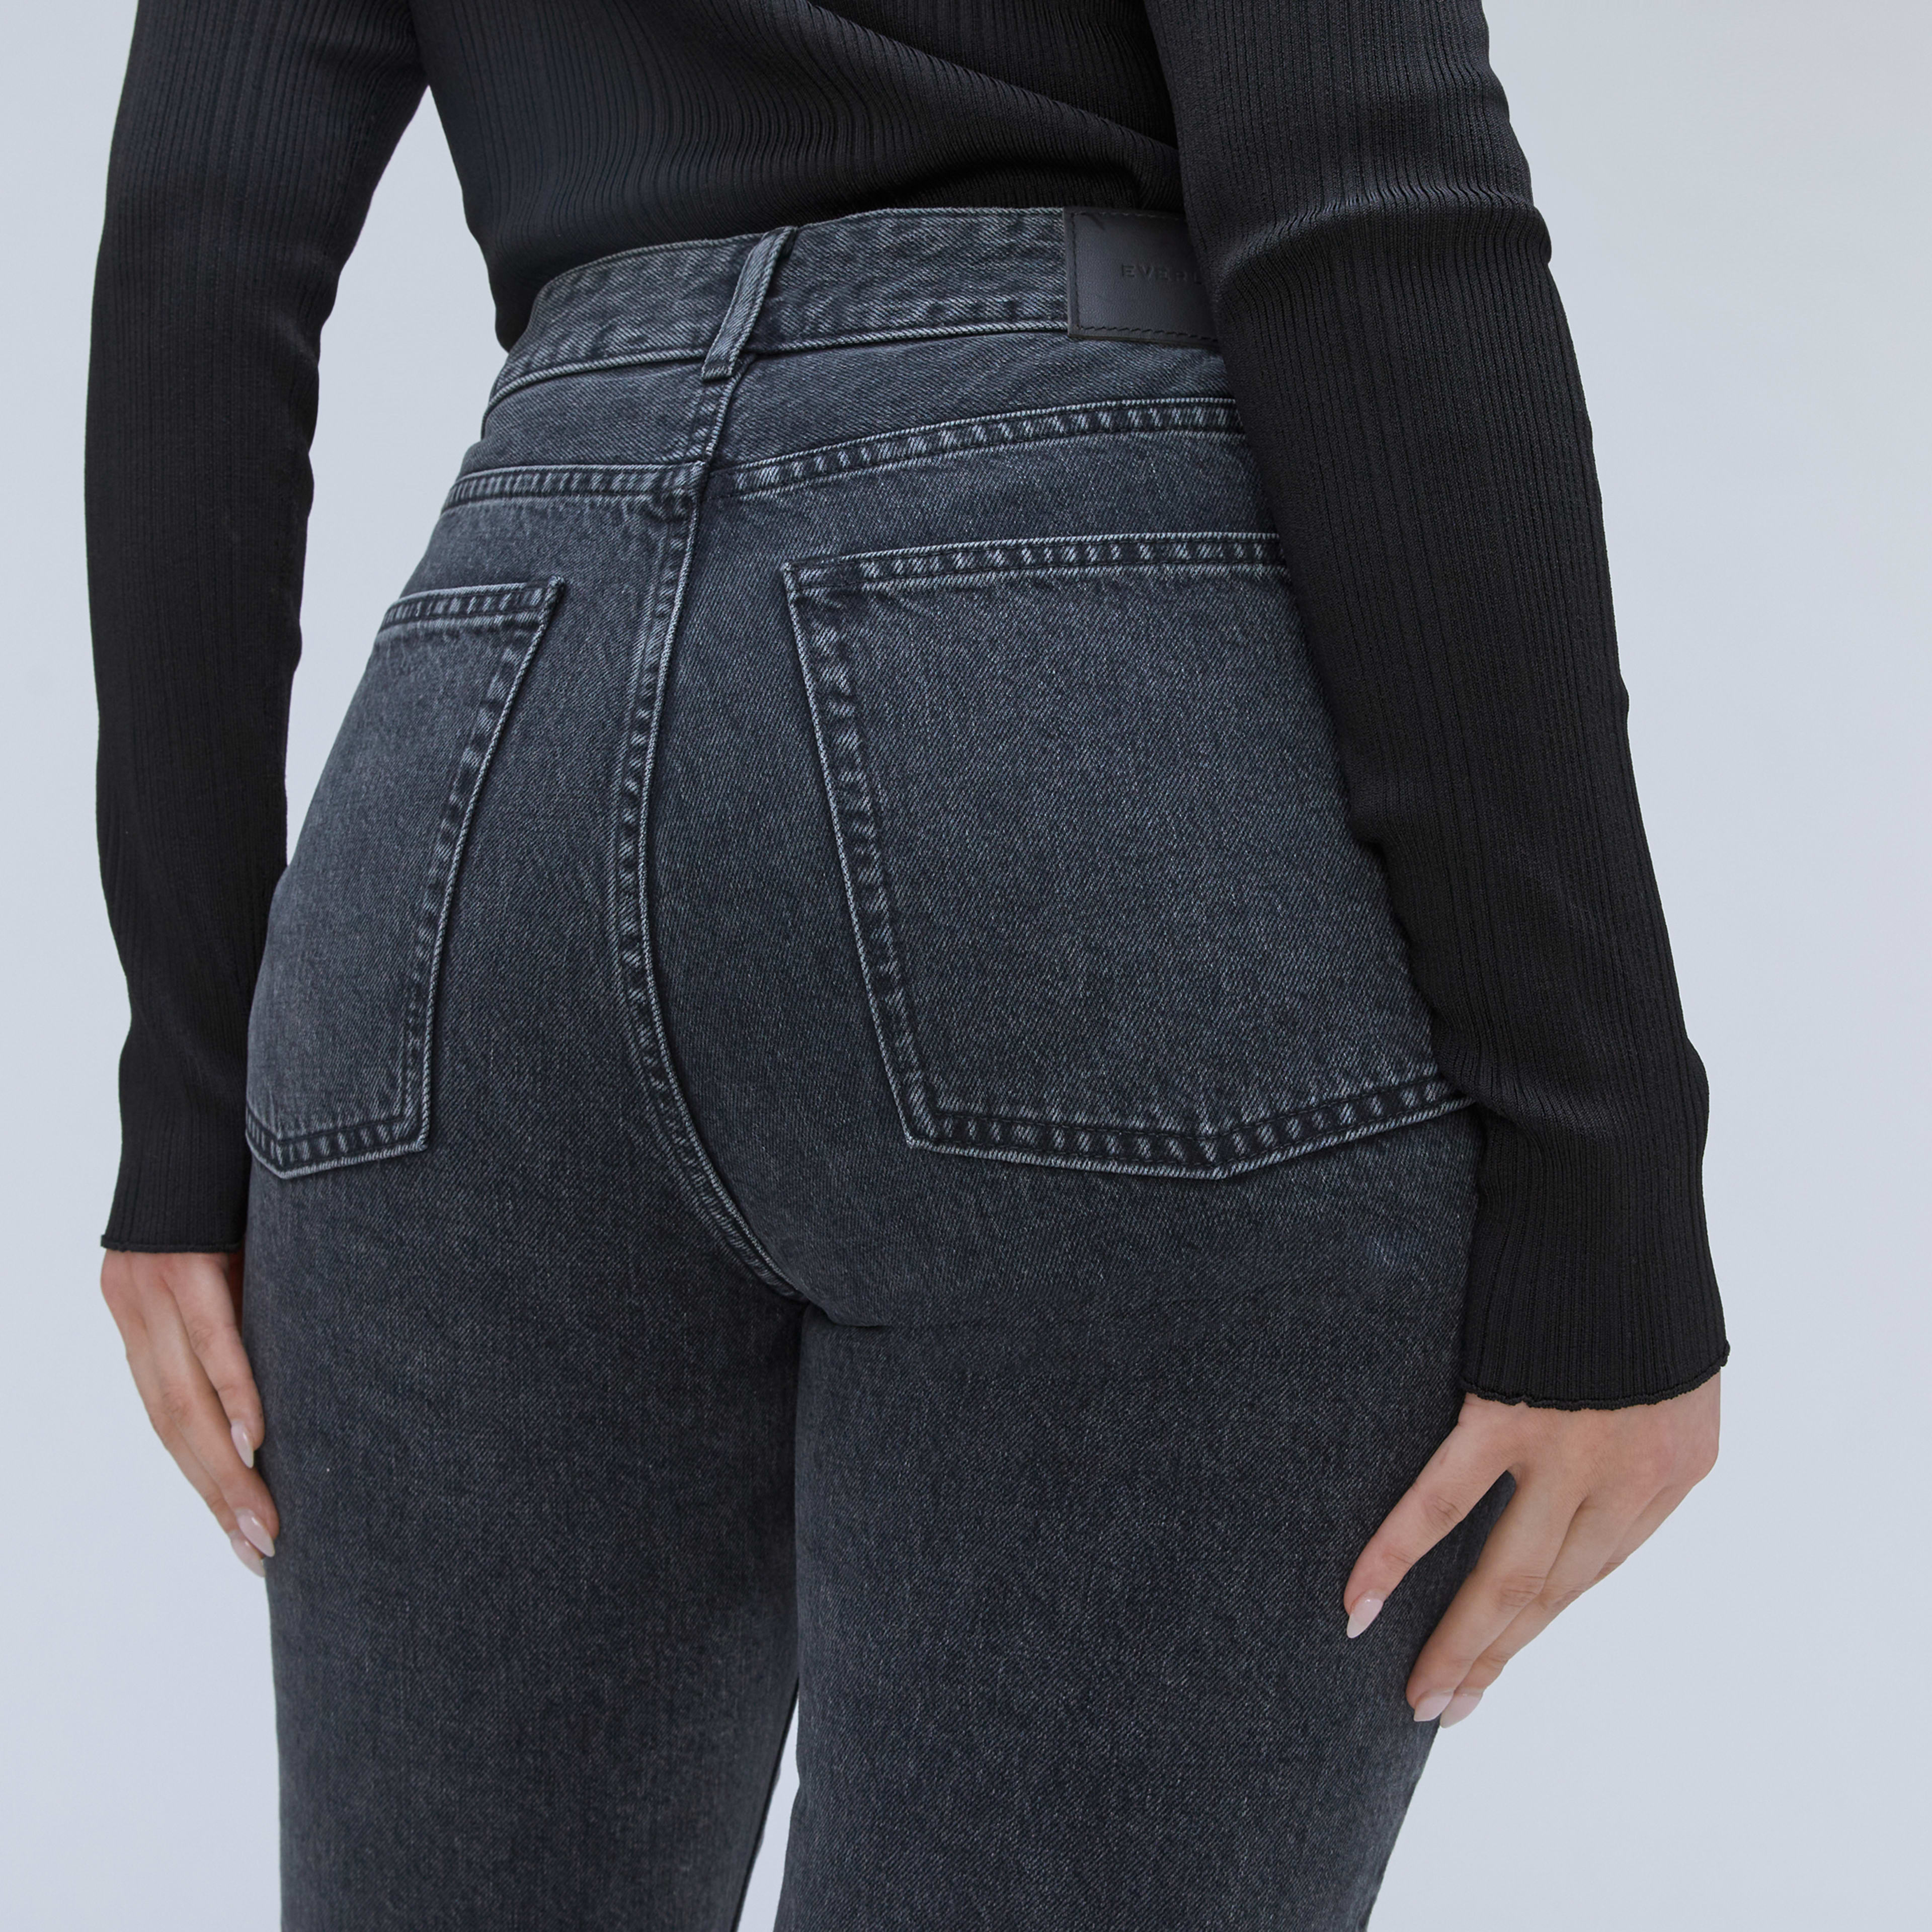 The Curvy 90s Cheeky® Jean Washed Black Everlane